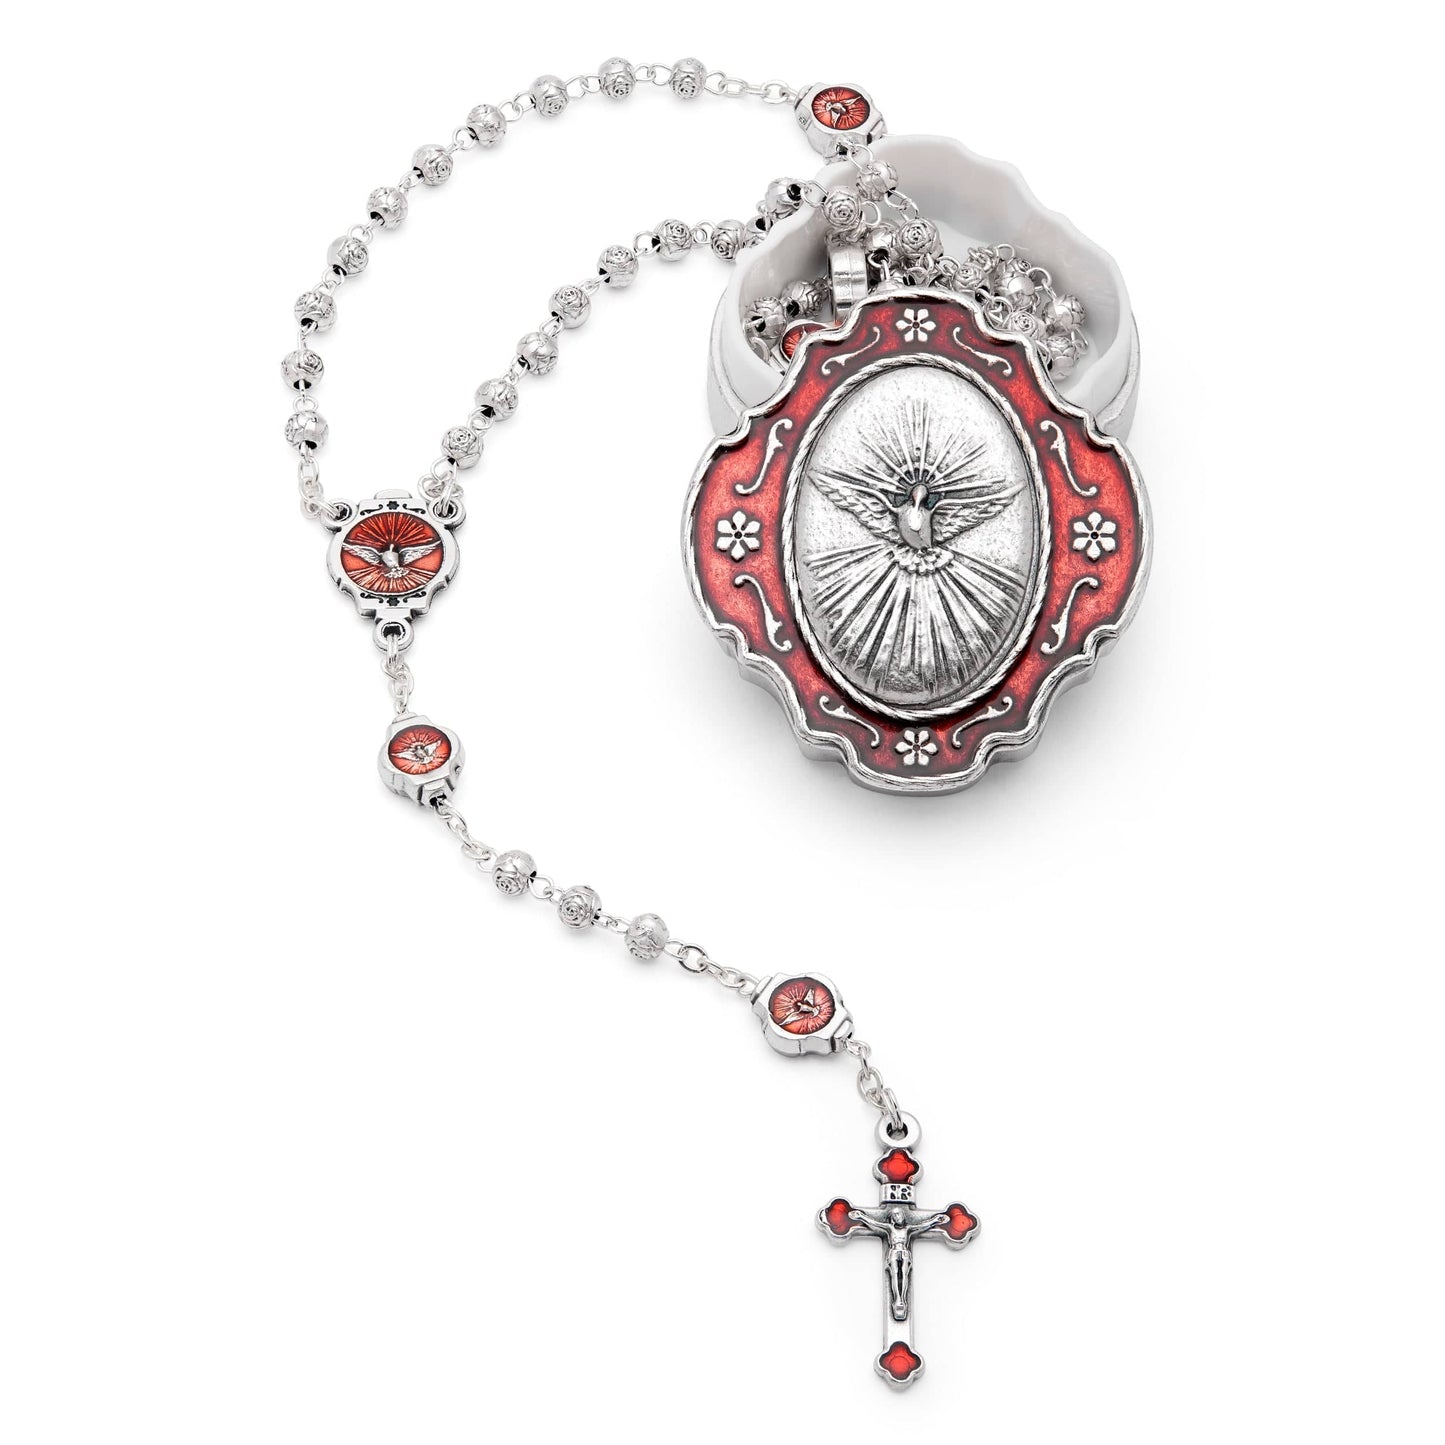 MONDO CATTOLICO Prayer Beads 38 cm (14.96 in) / 4 mm (0.15 in) Case and Rosary of the Holy Spirit